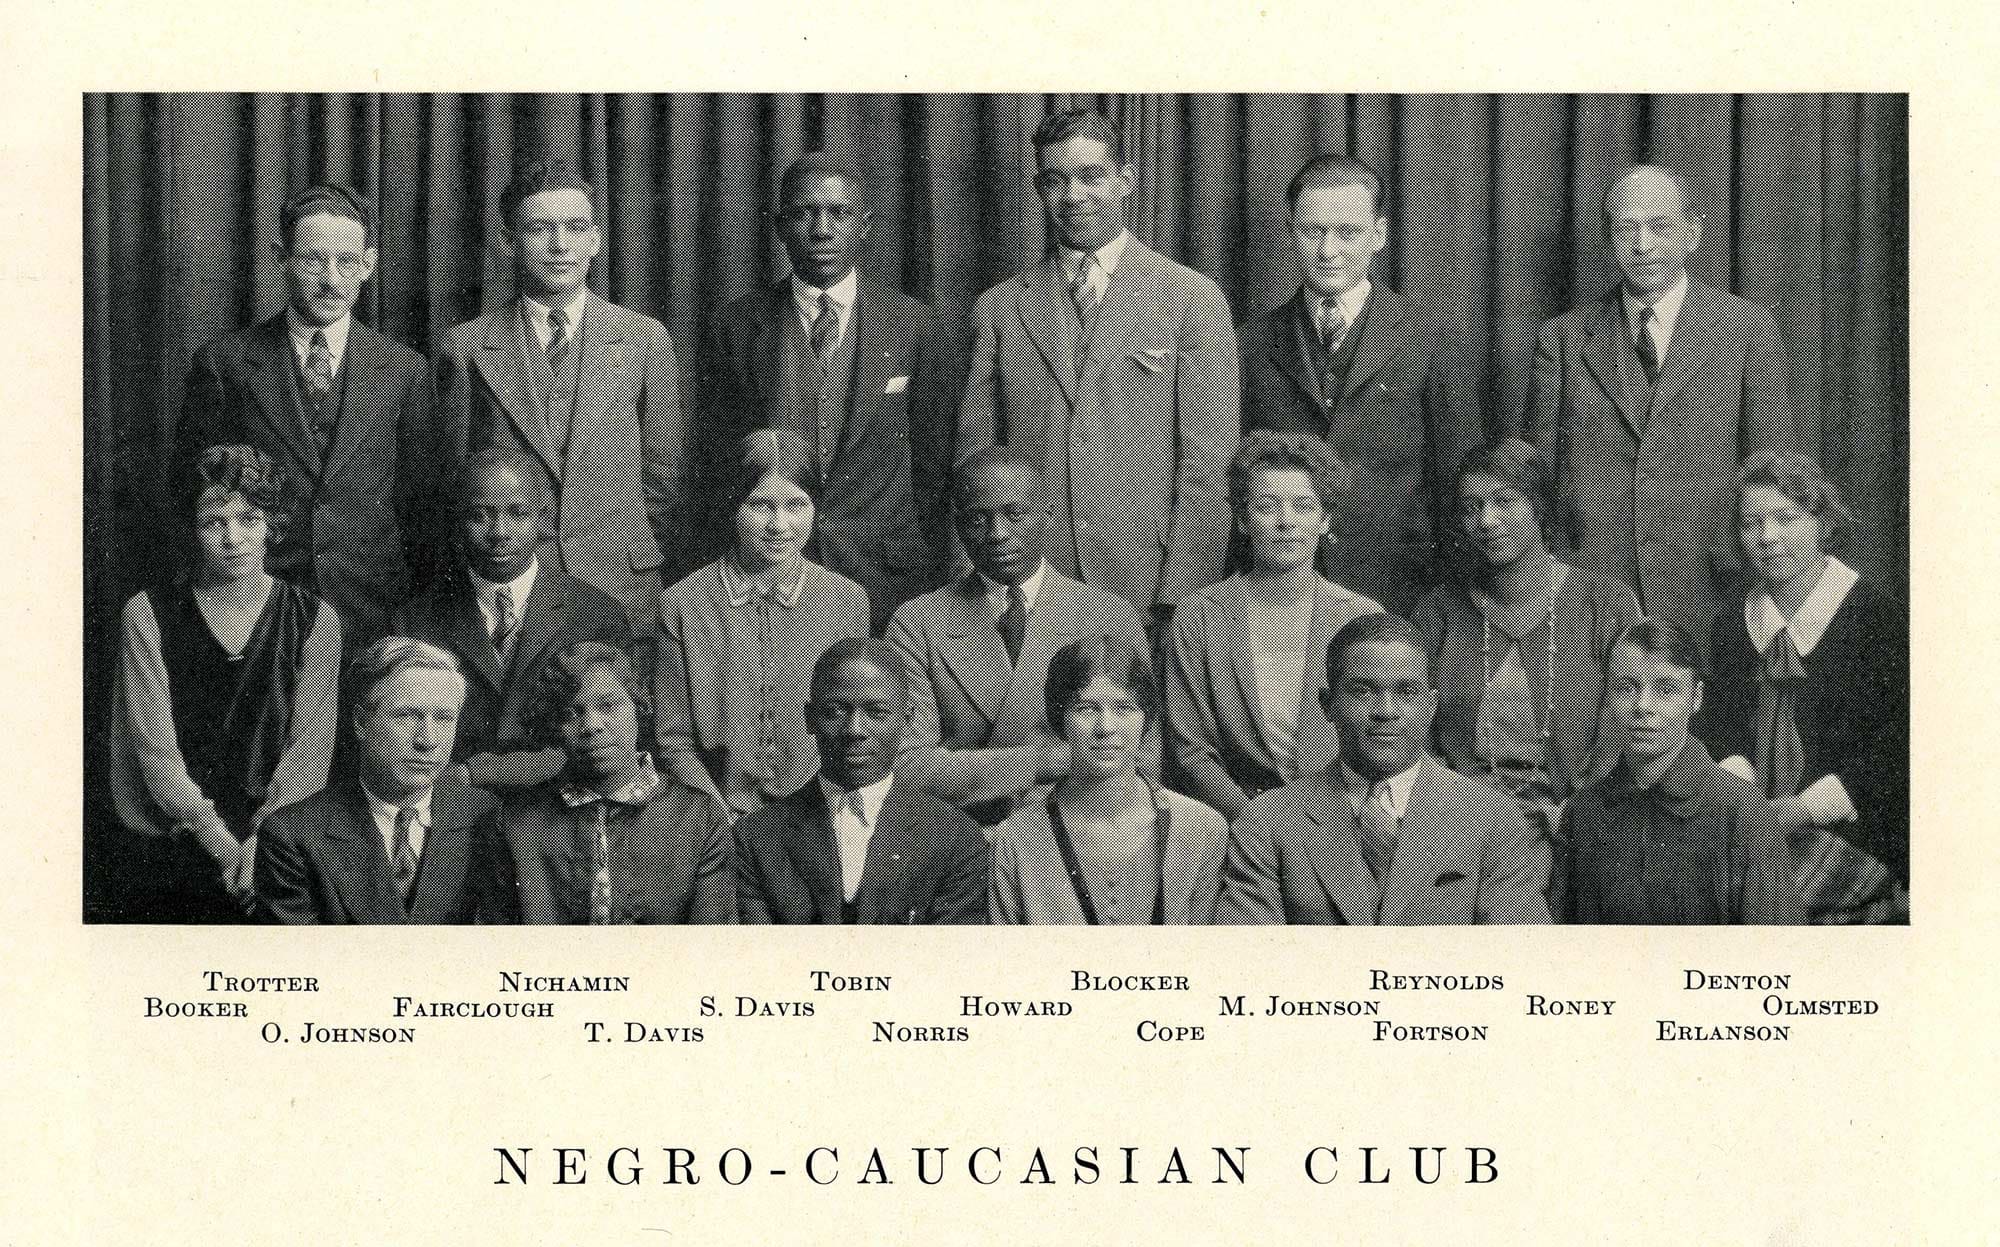 Members of the Negro-Caucasian Club pose for a group photograph.